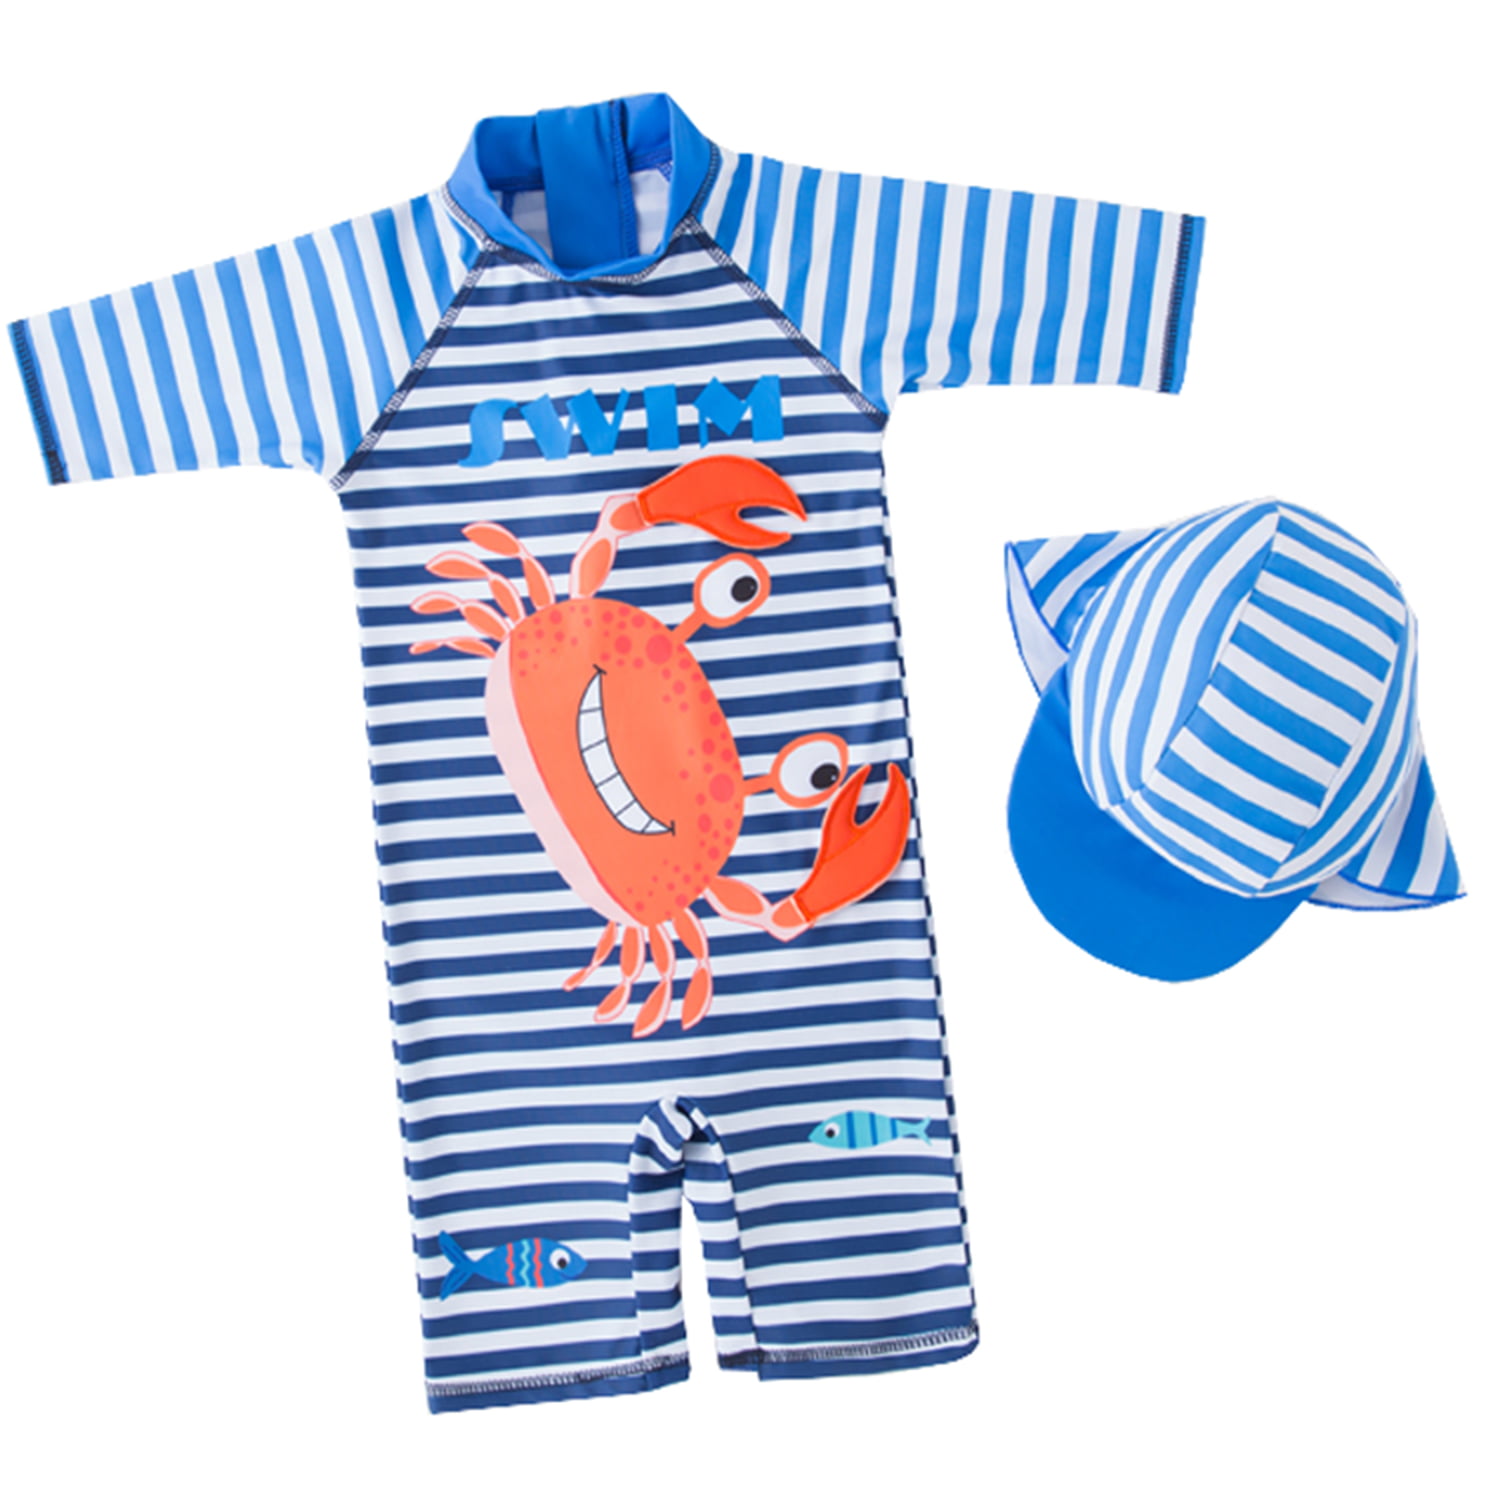 Baby Boys Swimsuit,All-in-One Rash Guard Sun Protection Quick-Drying Surfing Swimwear with Hat Crab Style